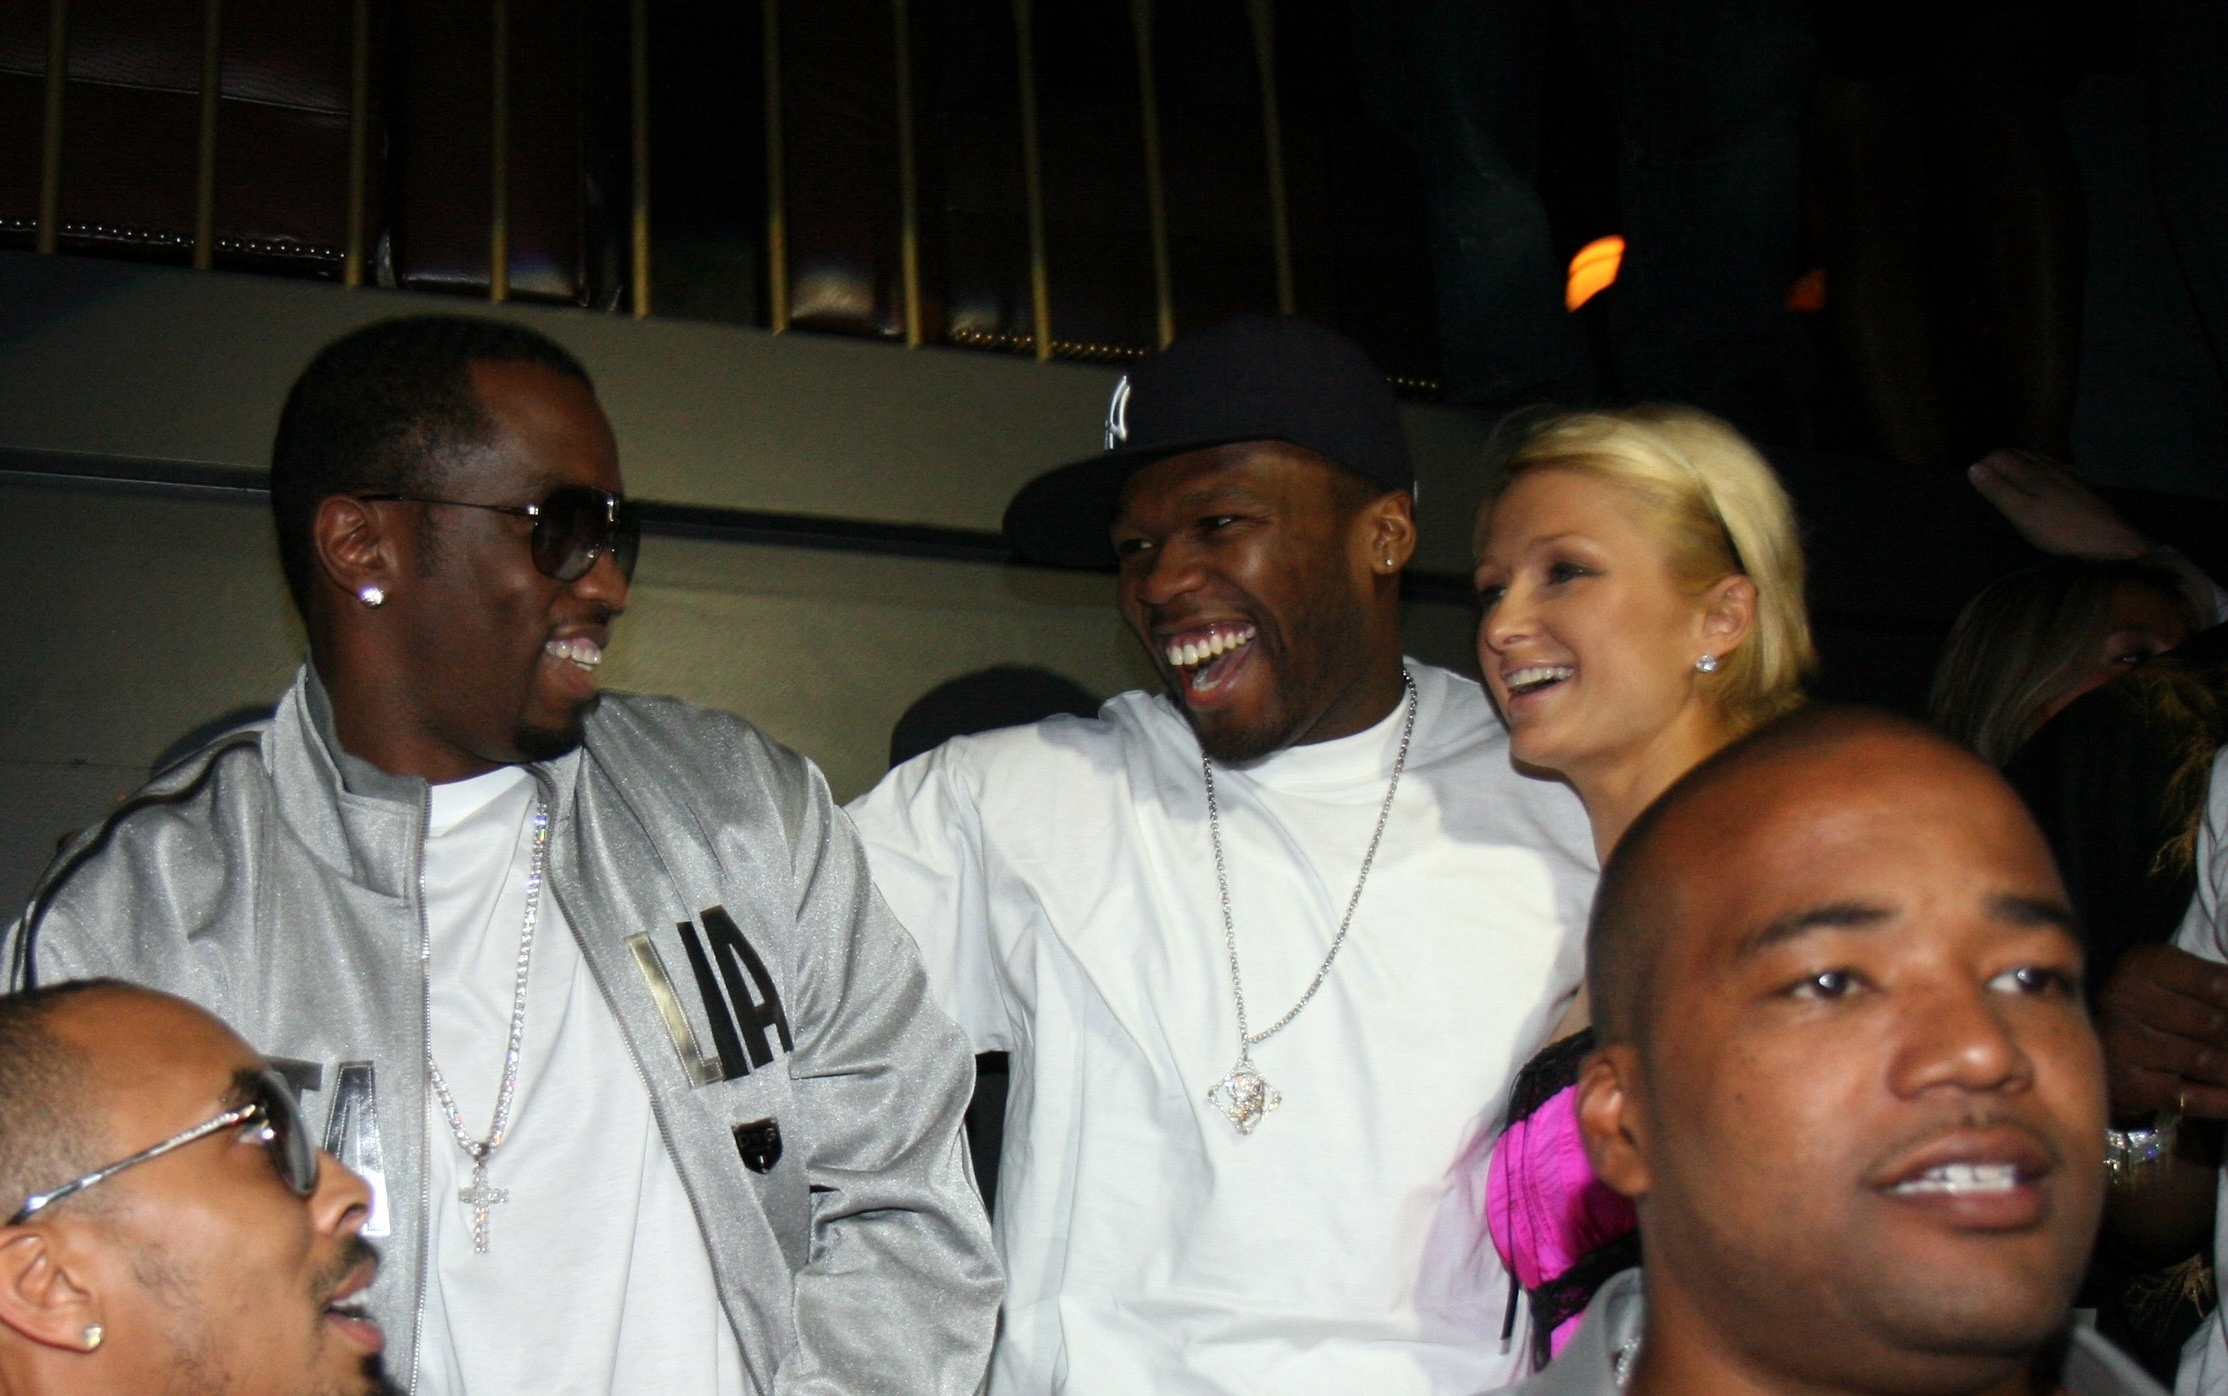 Sean Combs and 50 Cent in matching gray outfits share a laugh with Paris Hilton, who wears a light top